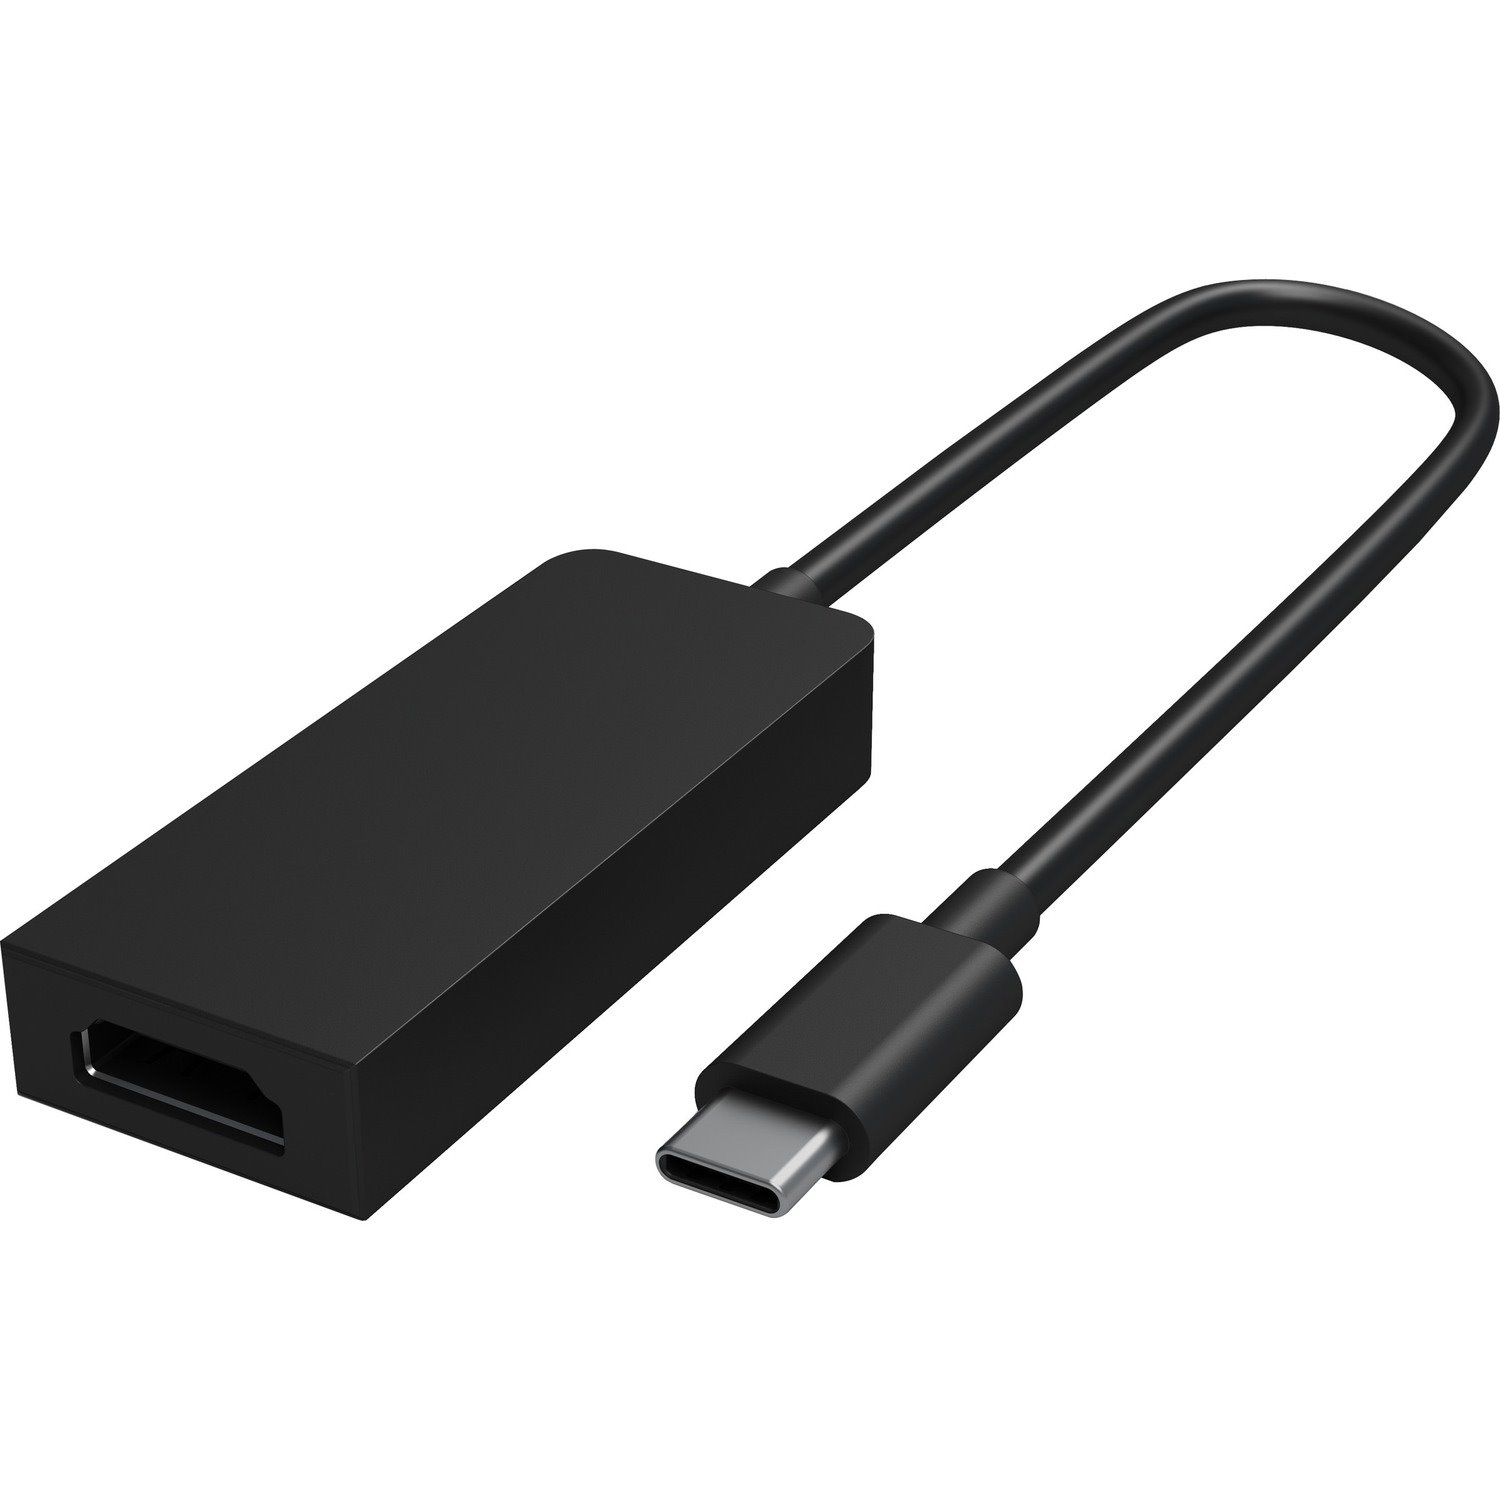 Surface USB-C to HDMI Adapter